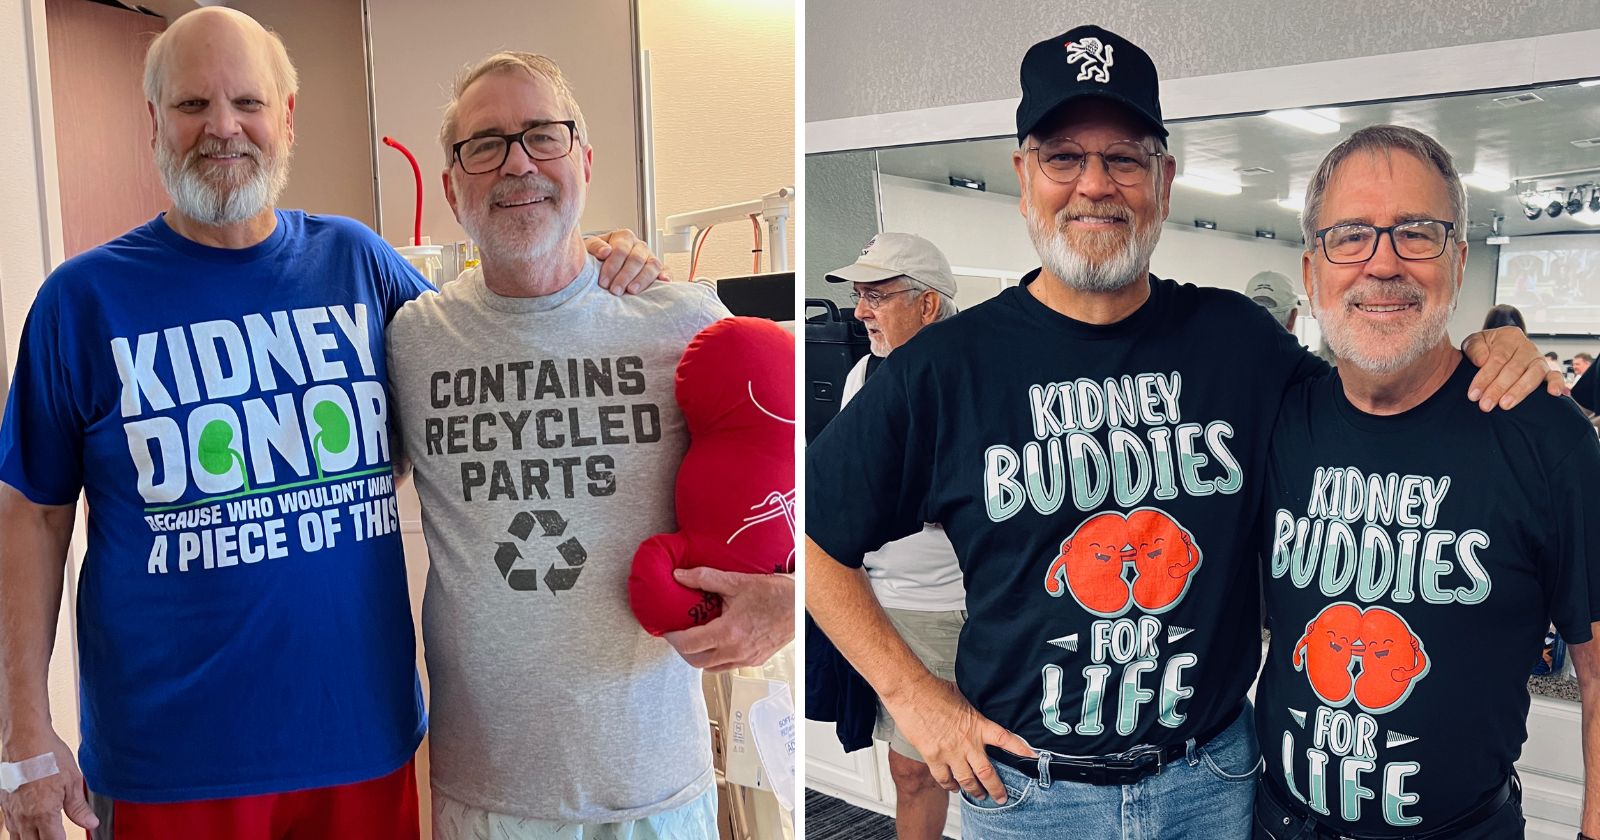 This past June, Stephen was the recipient of a second kidney transplant, a remarkable 32 and a half years after his sister gave him the first transplanted kidney.